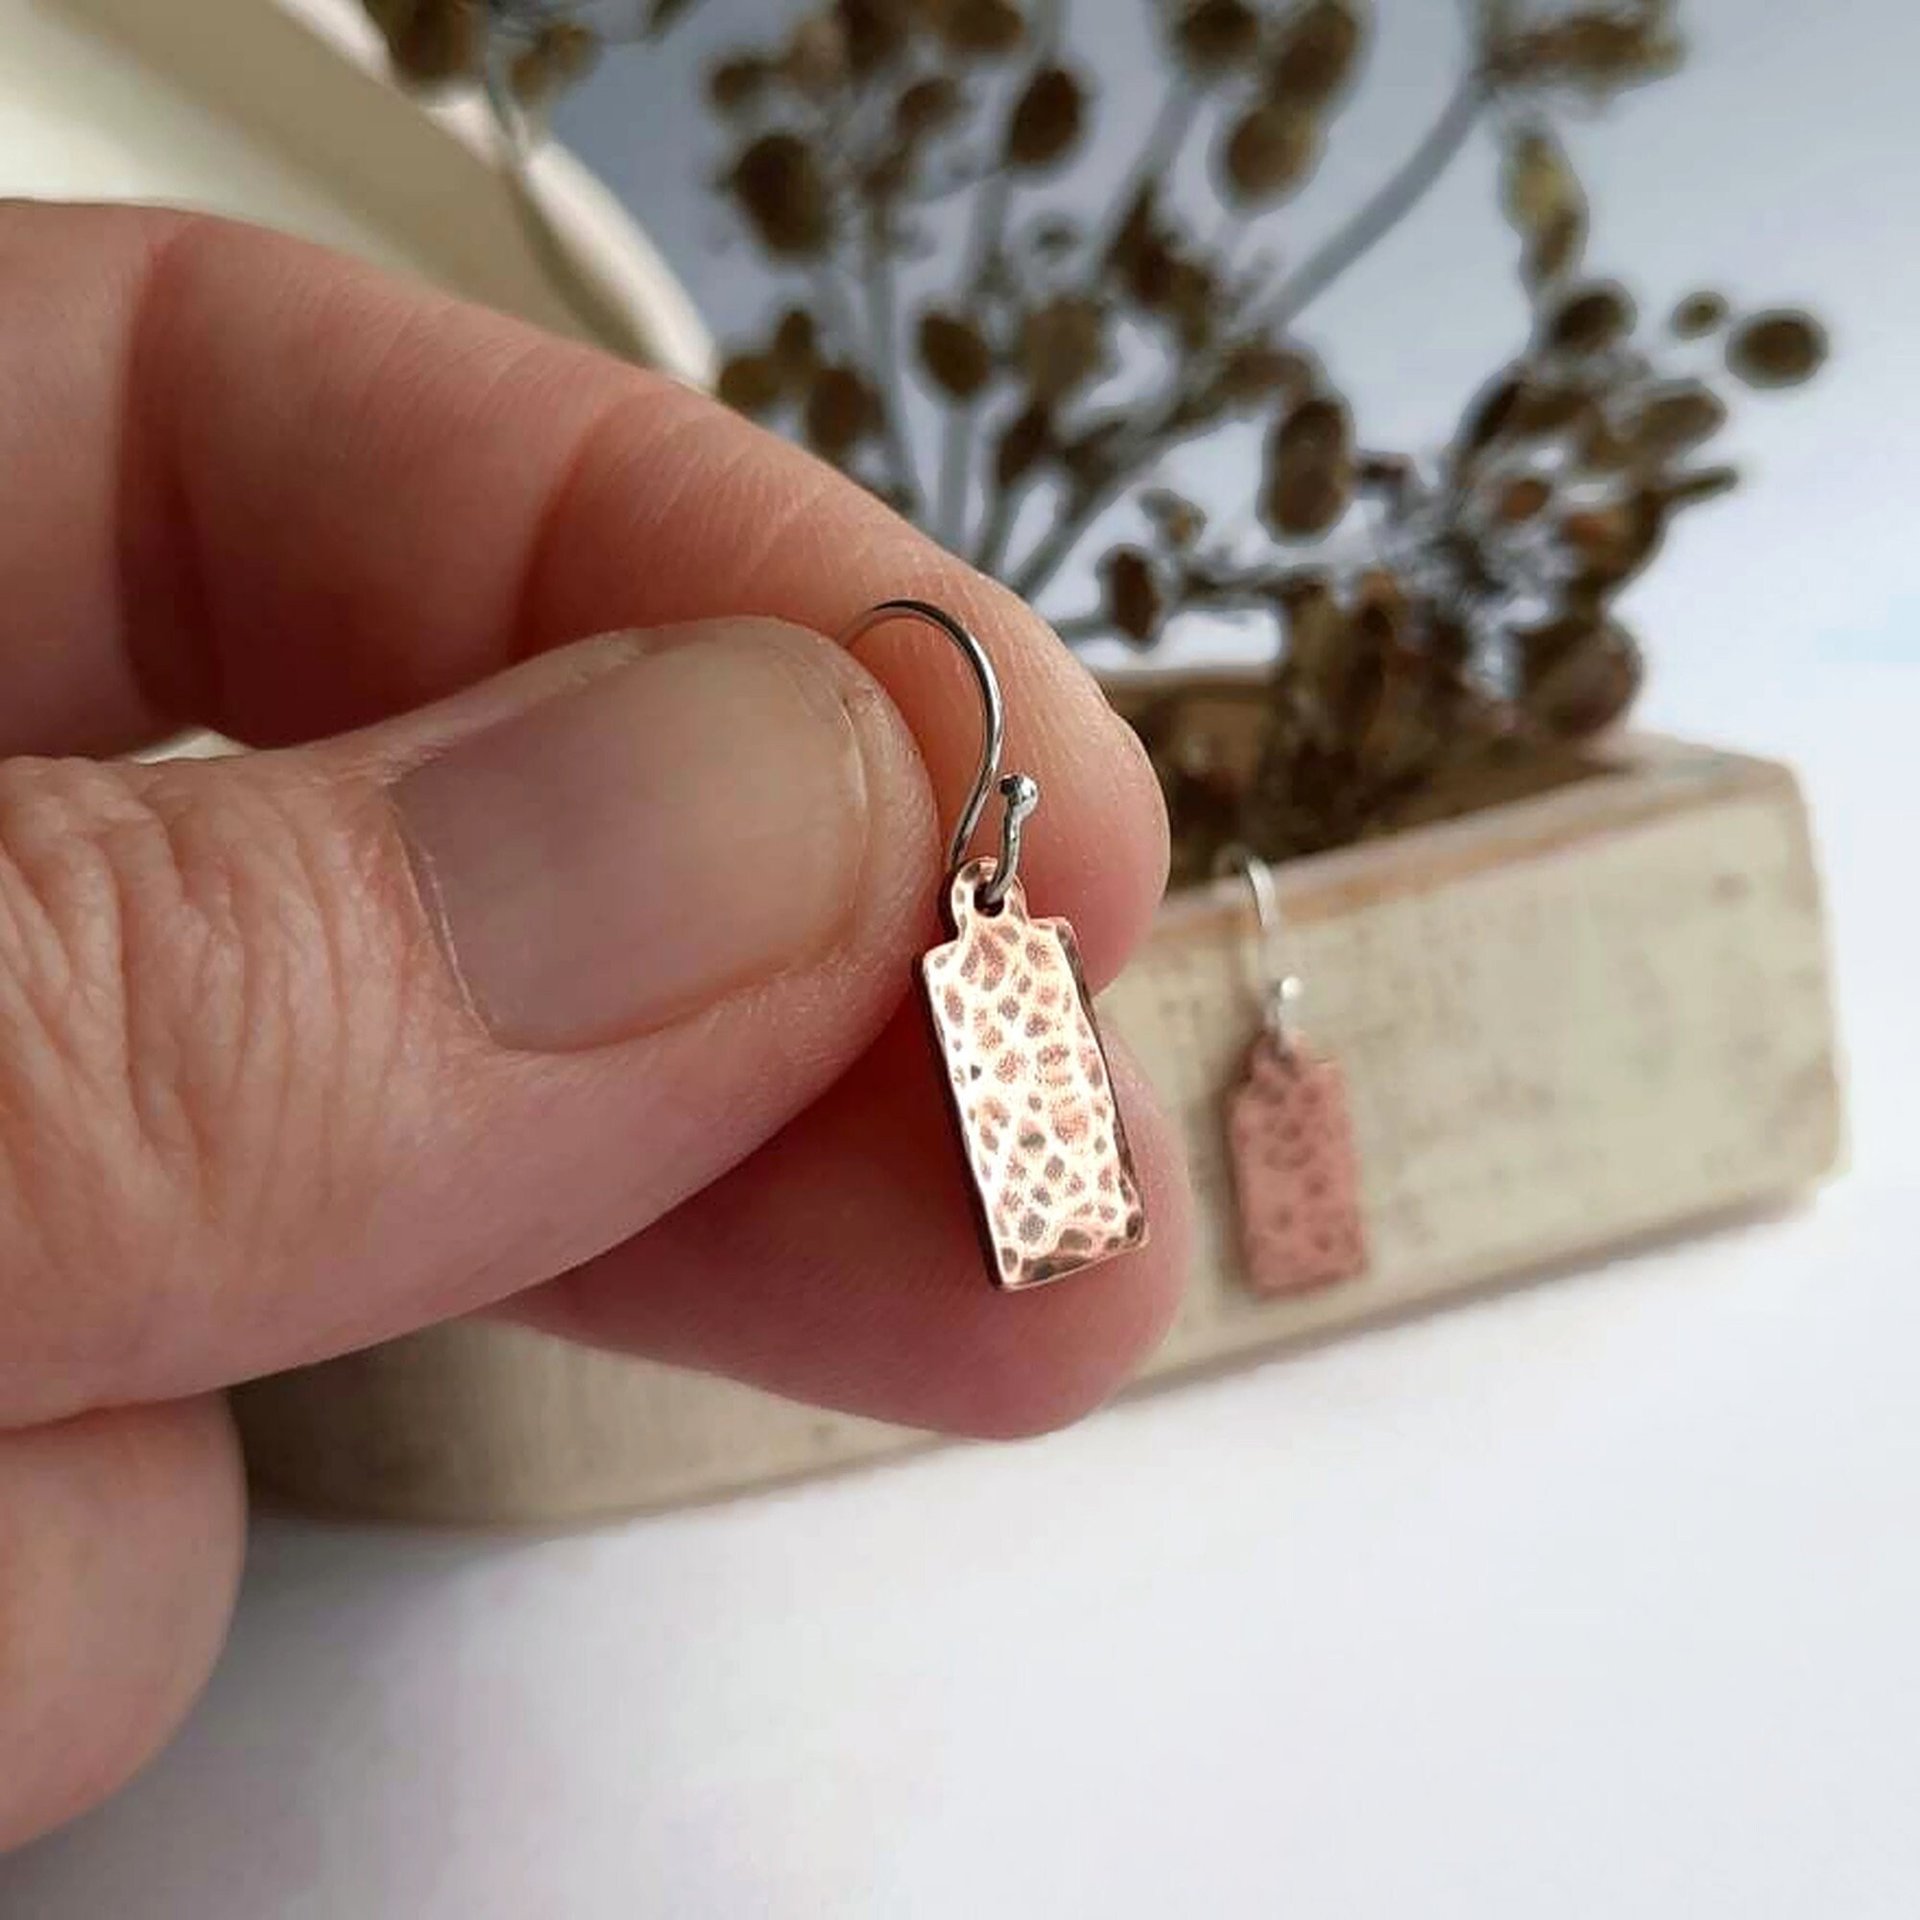 Hammered and textured copper drop earrings, handmade by The Tiny Tree Frog Jewellery